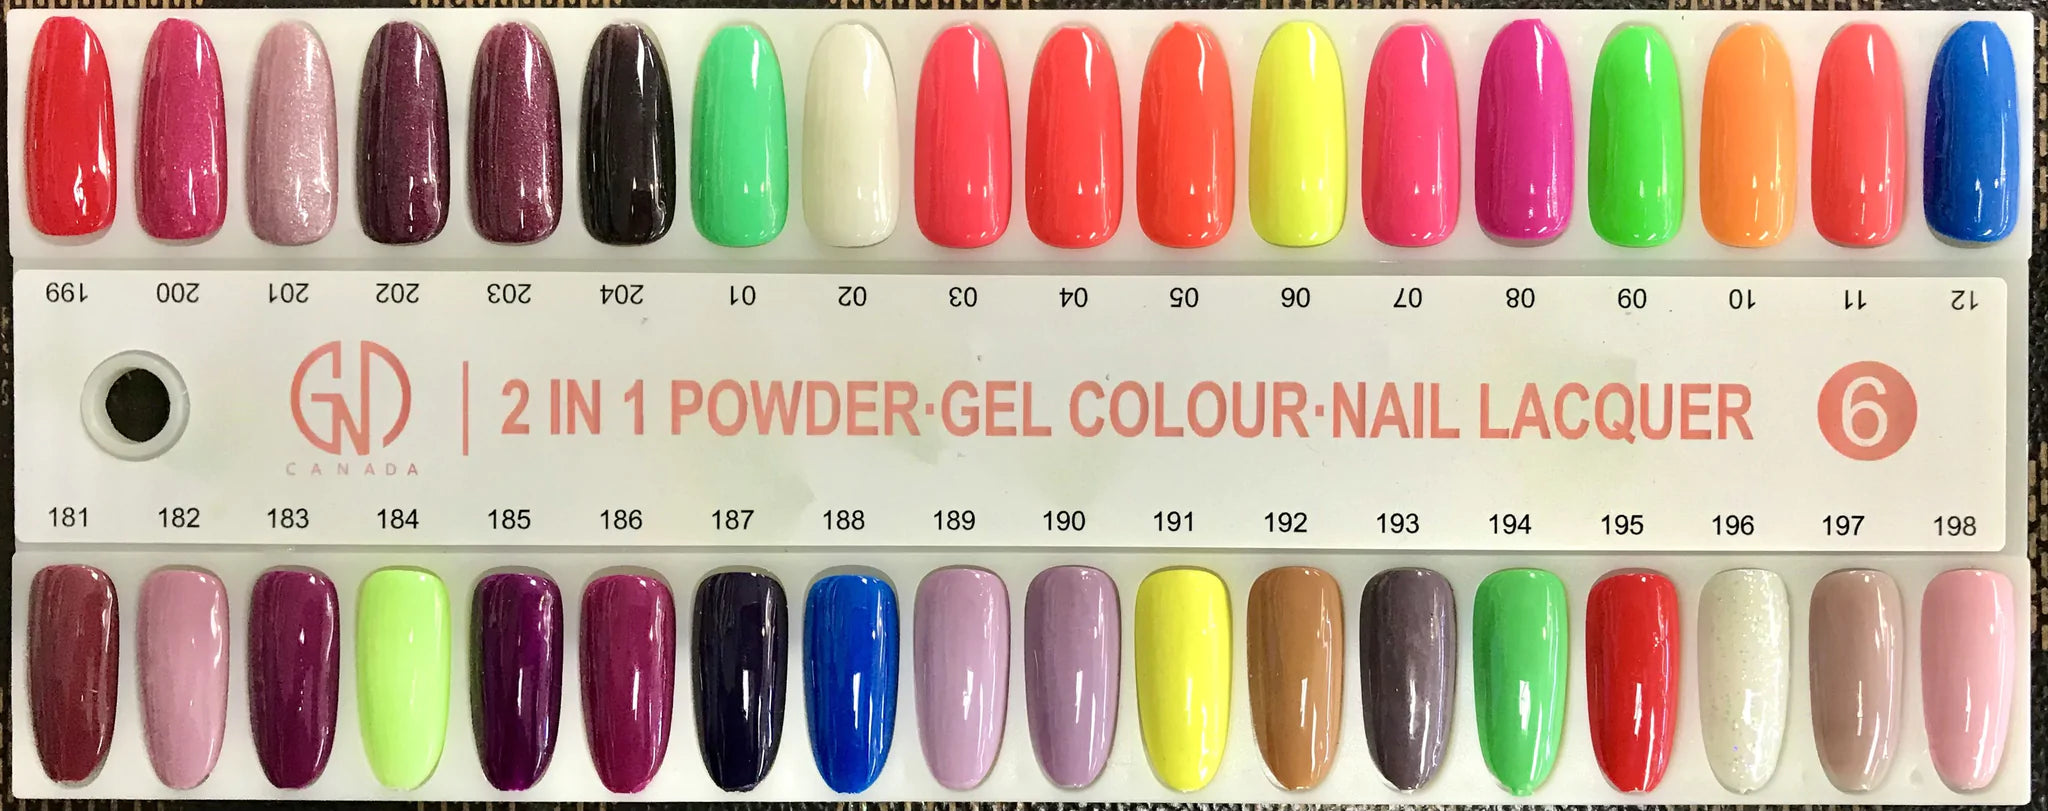 GND Duo Gel & Lacquer 190